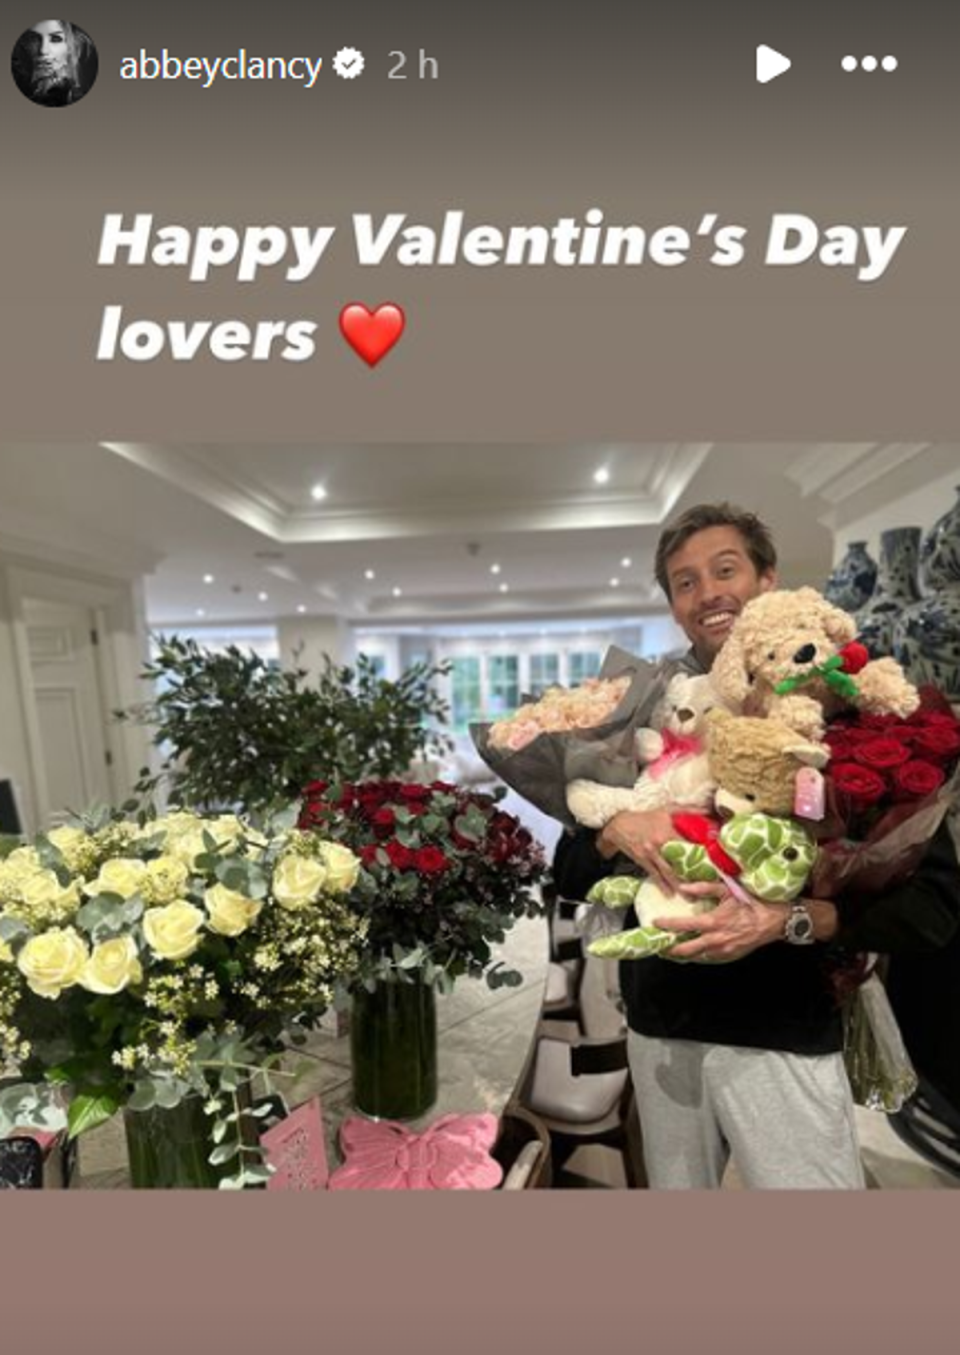 Abbey Clancy paid tribute to husband Peter Crouch (Instagram/Abbey Clancy)